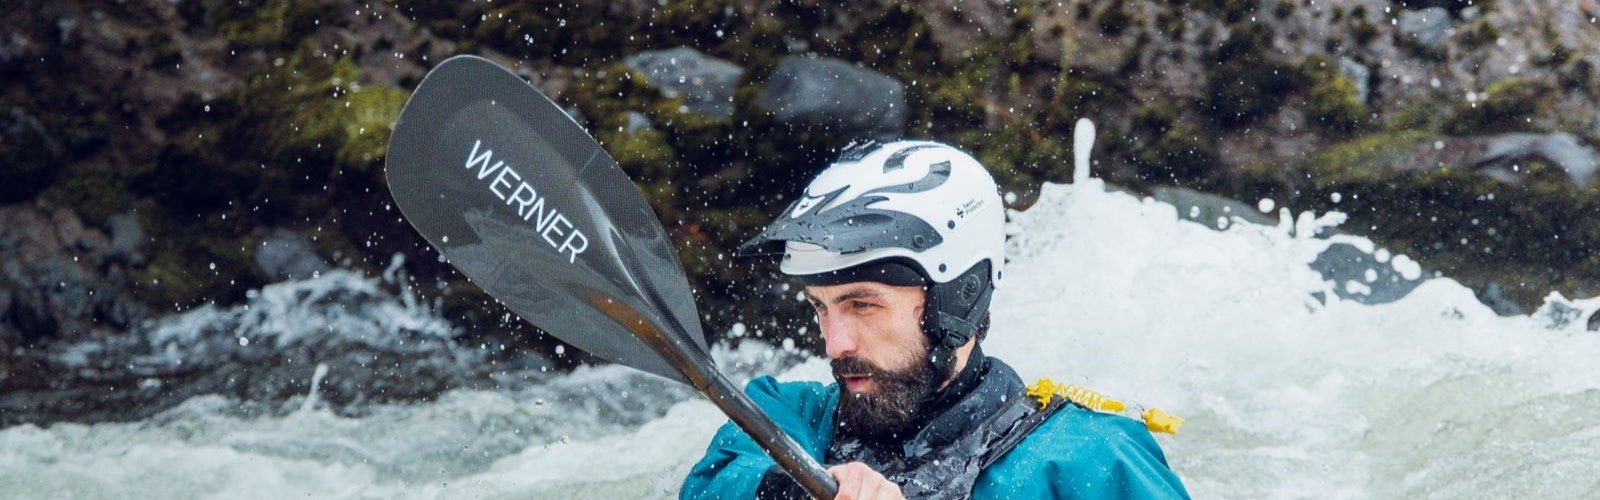 Werner Stealth Paddle: In-Depth Review